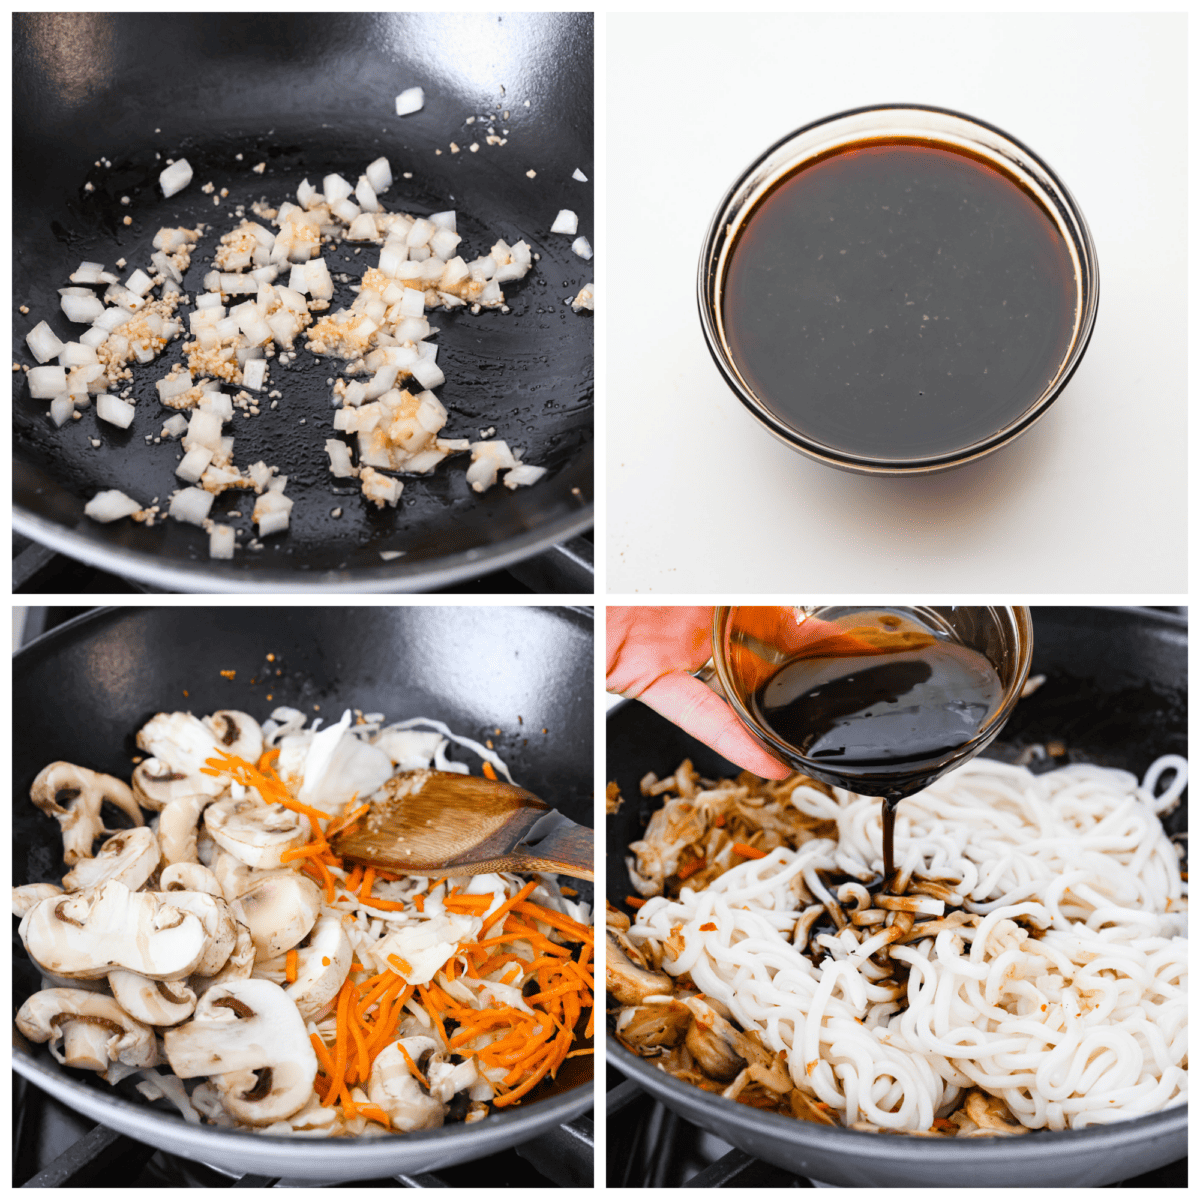 First process photo of onion, garlic, and ginger cooking in a wok. Second process photo is sauce mixed in a bowl. Third process photo of veggies cooking in a wok. Fourth process photo of sauce and noodles added to the wok.